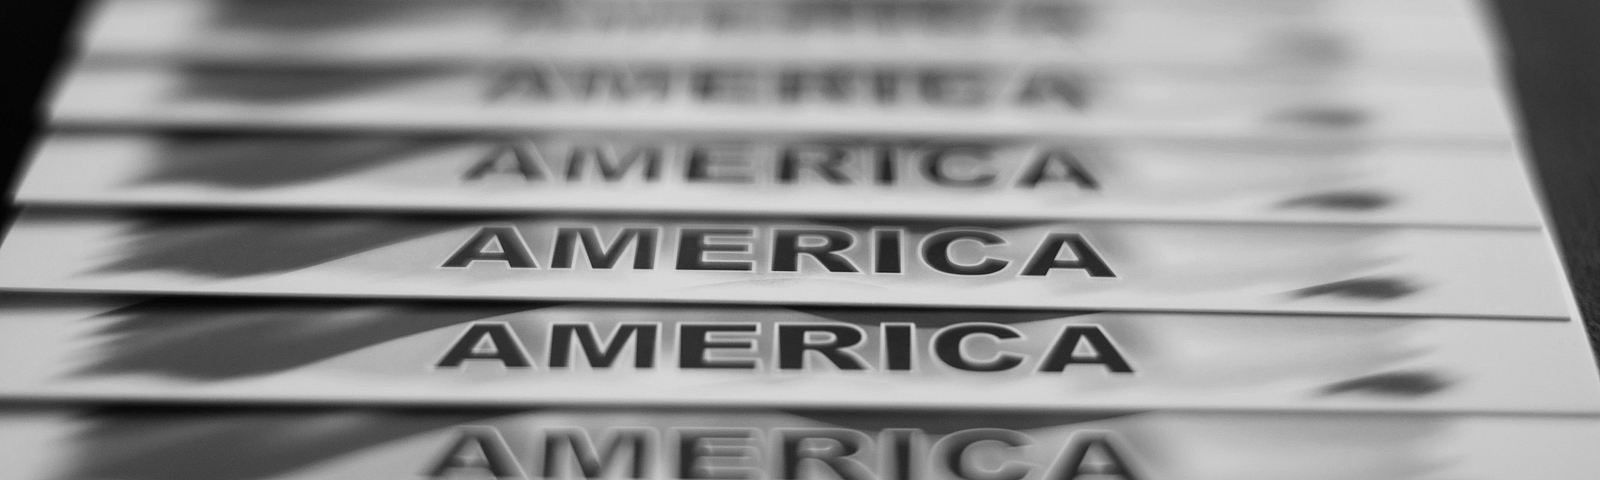 Black and white photo of a row of letter-sized papers with “America” printed at the bottom of each and displayed from foreground to background.